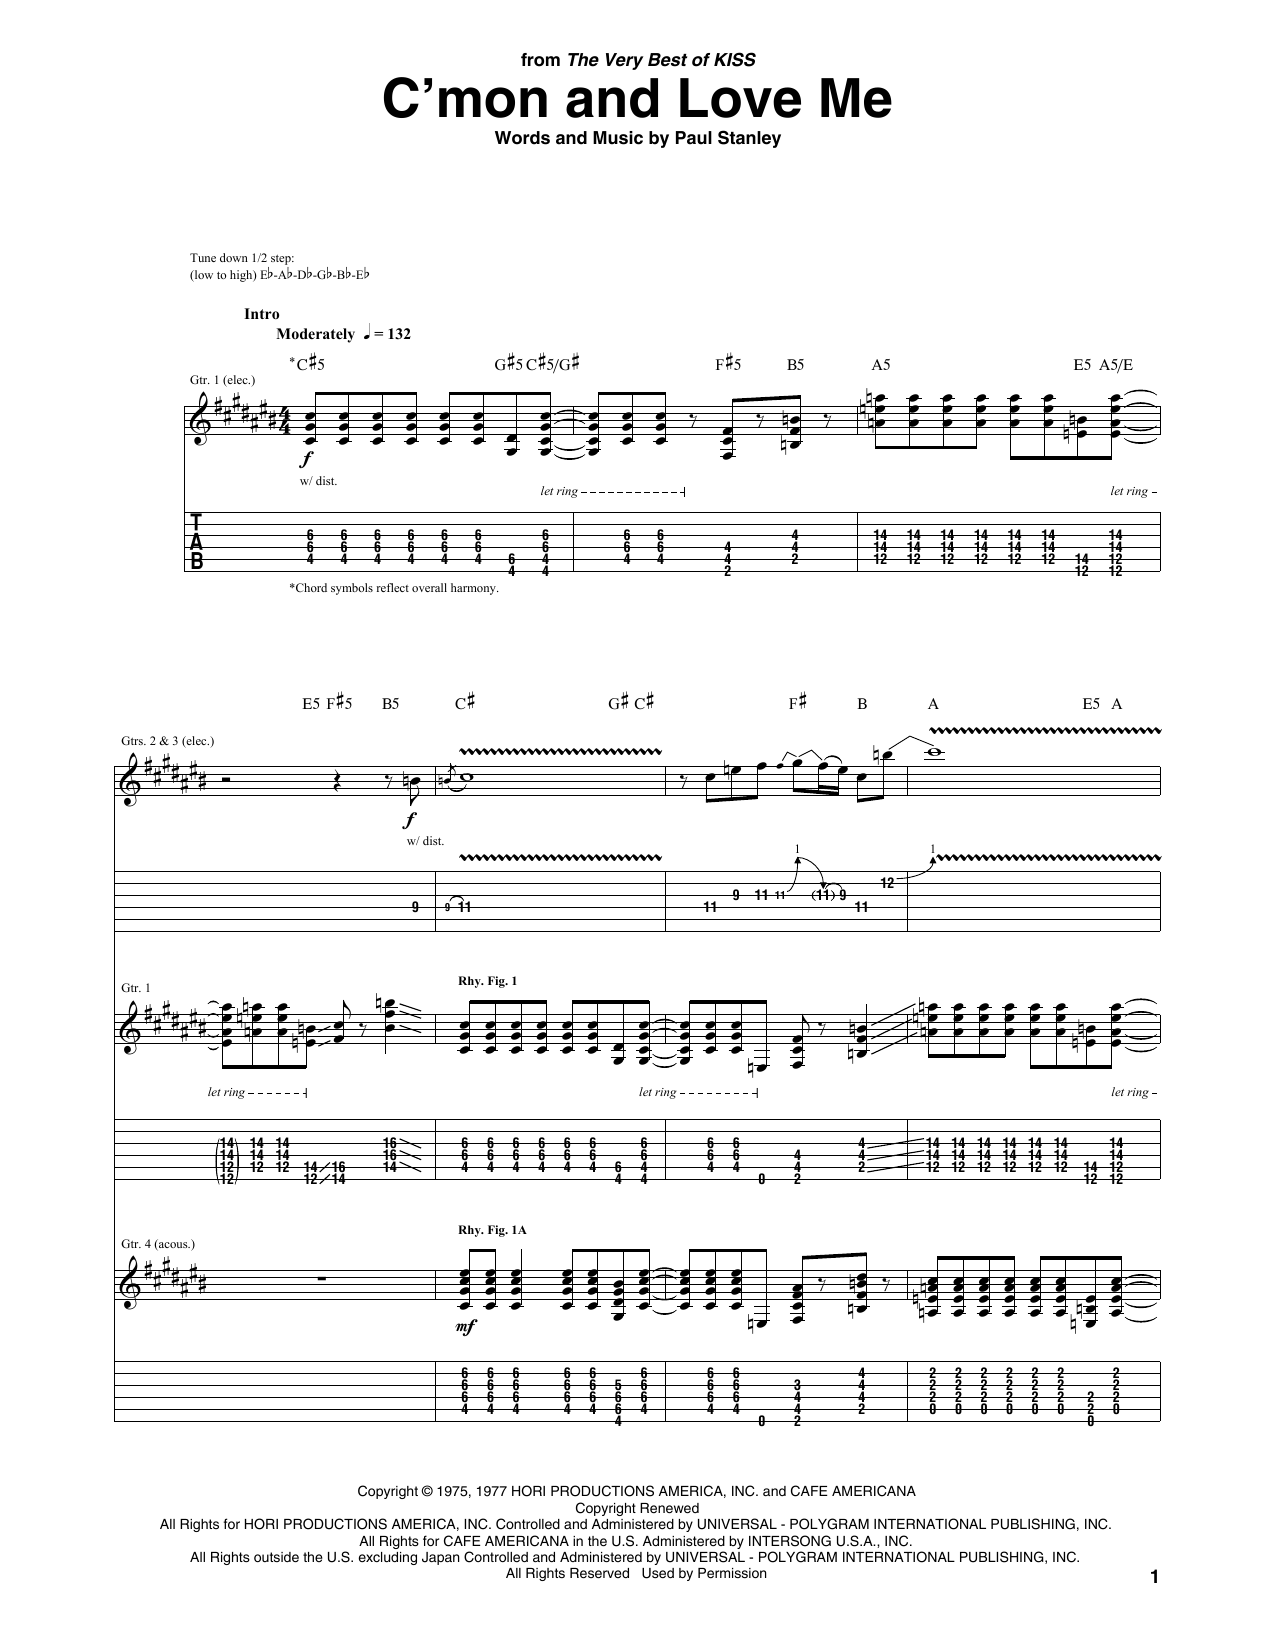 Download KISS C'mon And Love Me Sheet Music